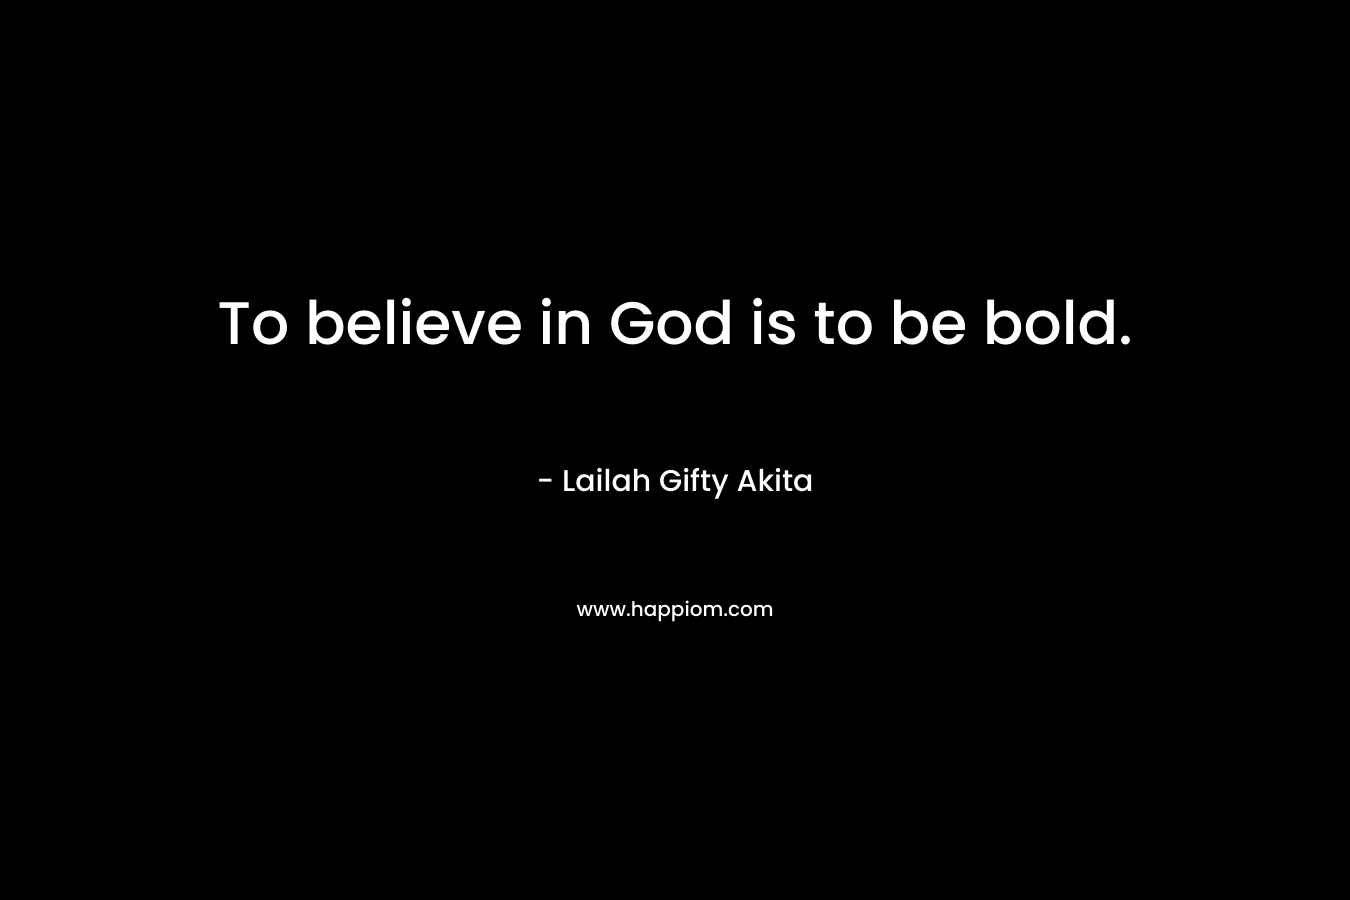 To believe in God is to be bold.